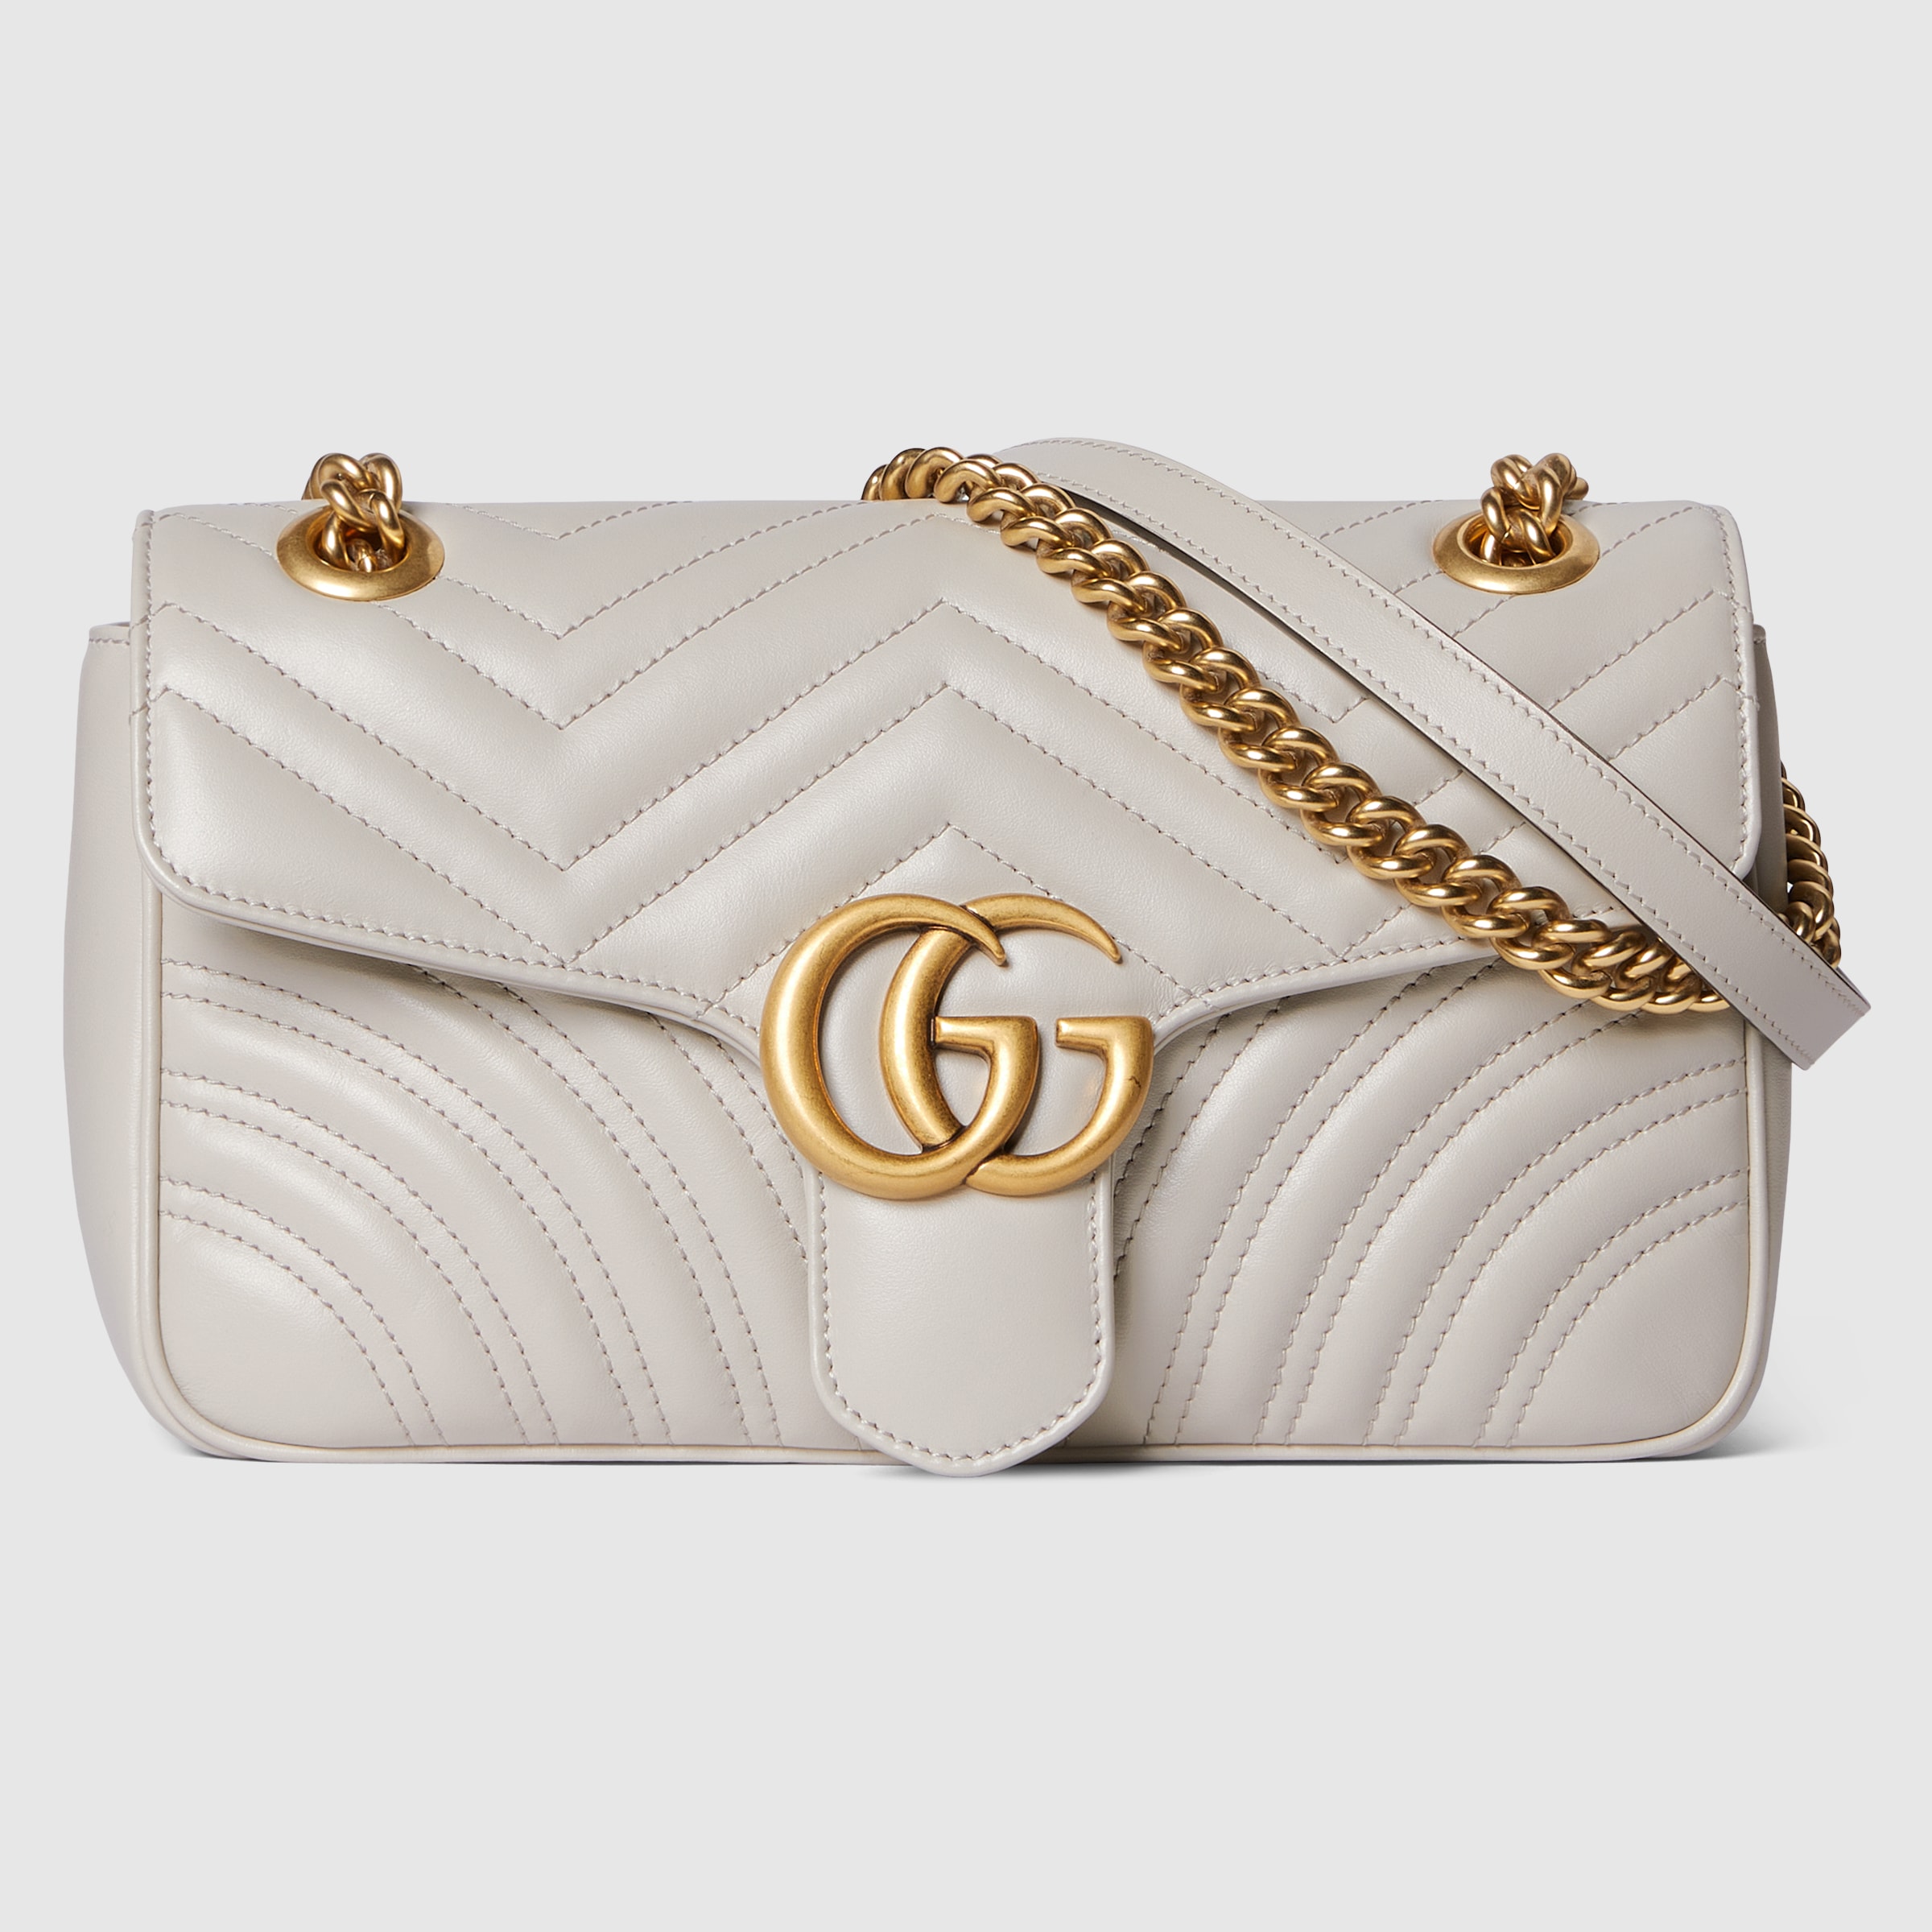 Gg marmont small shoulder bag